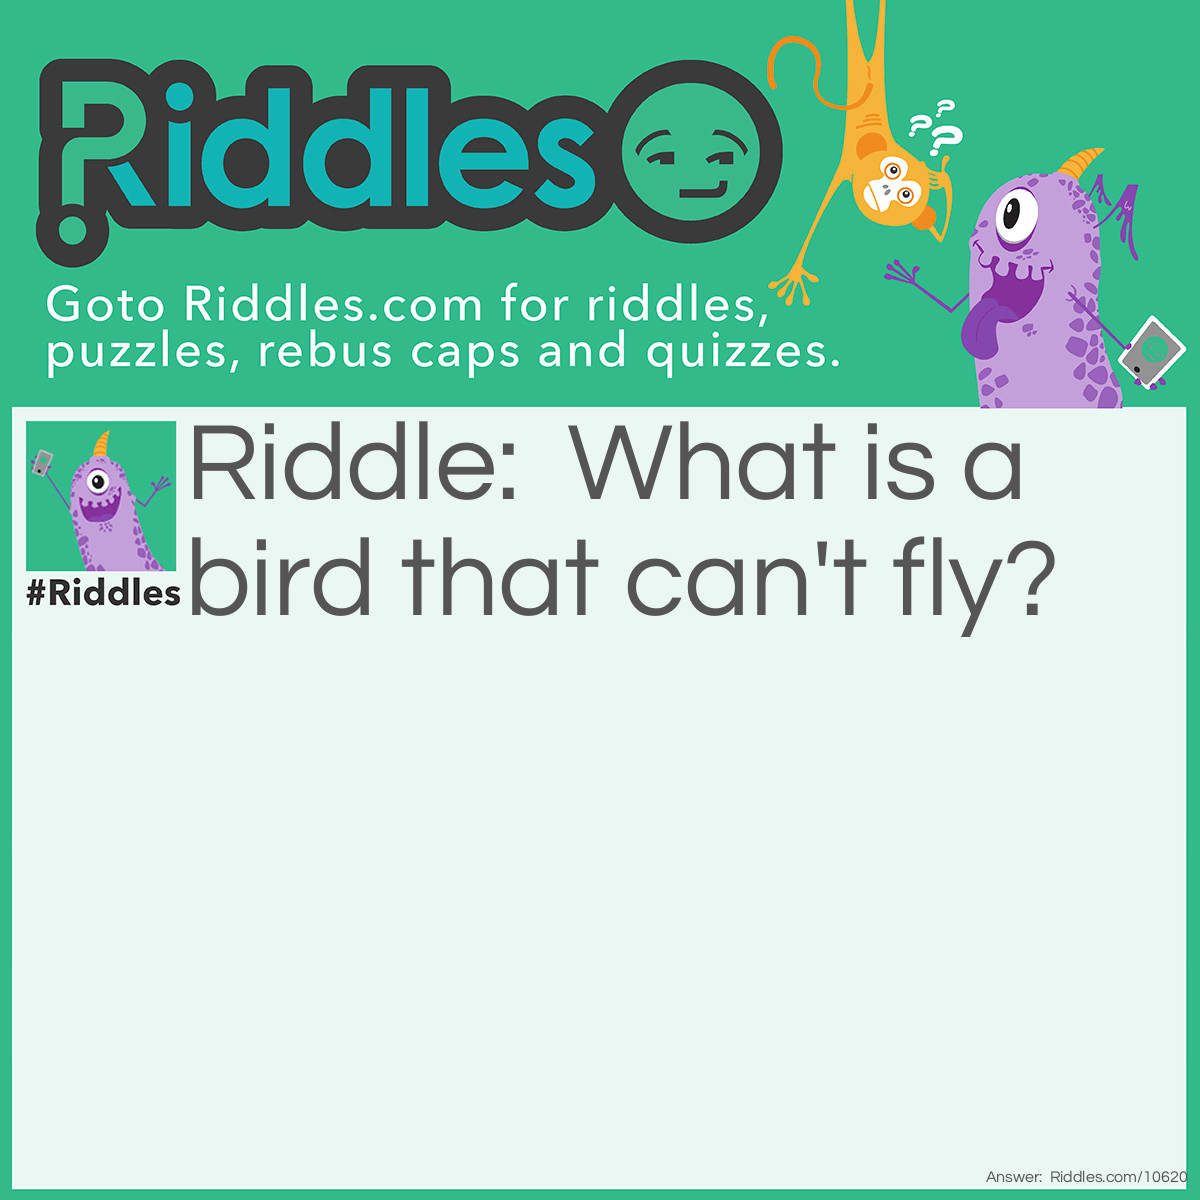 Riddle: What is a bird that can't fly? Answer: A dead one!